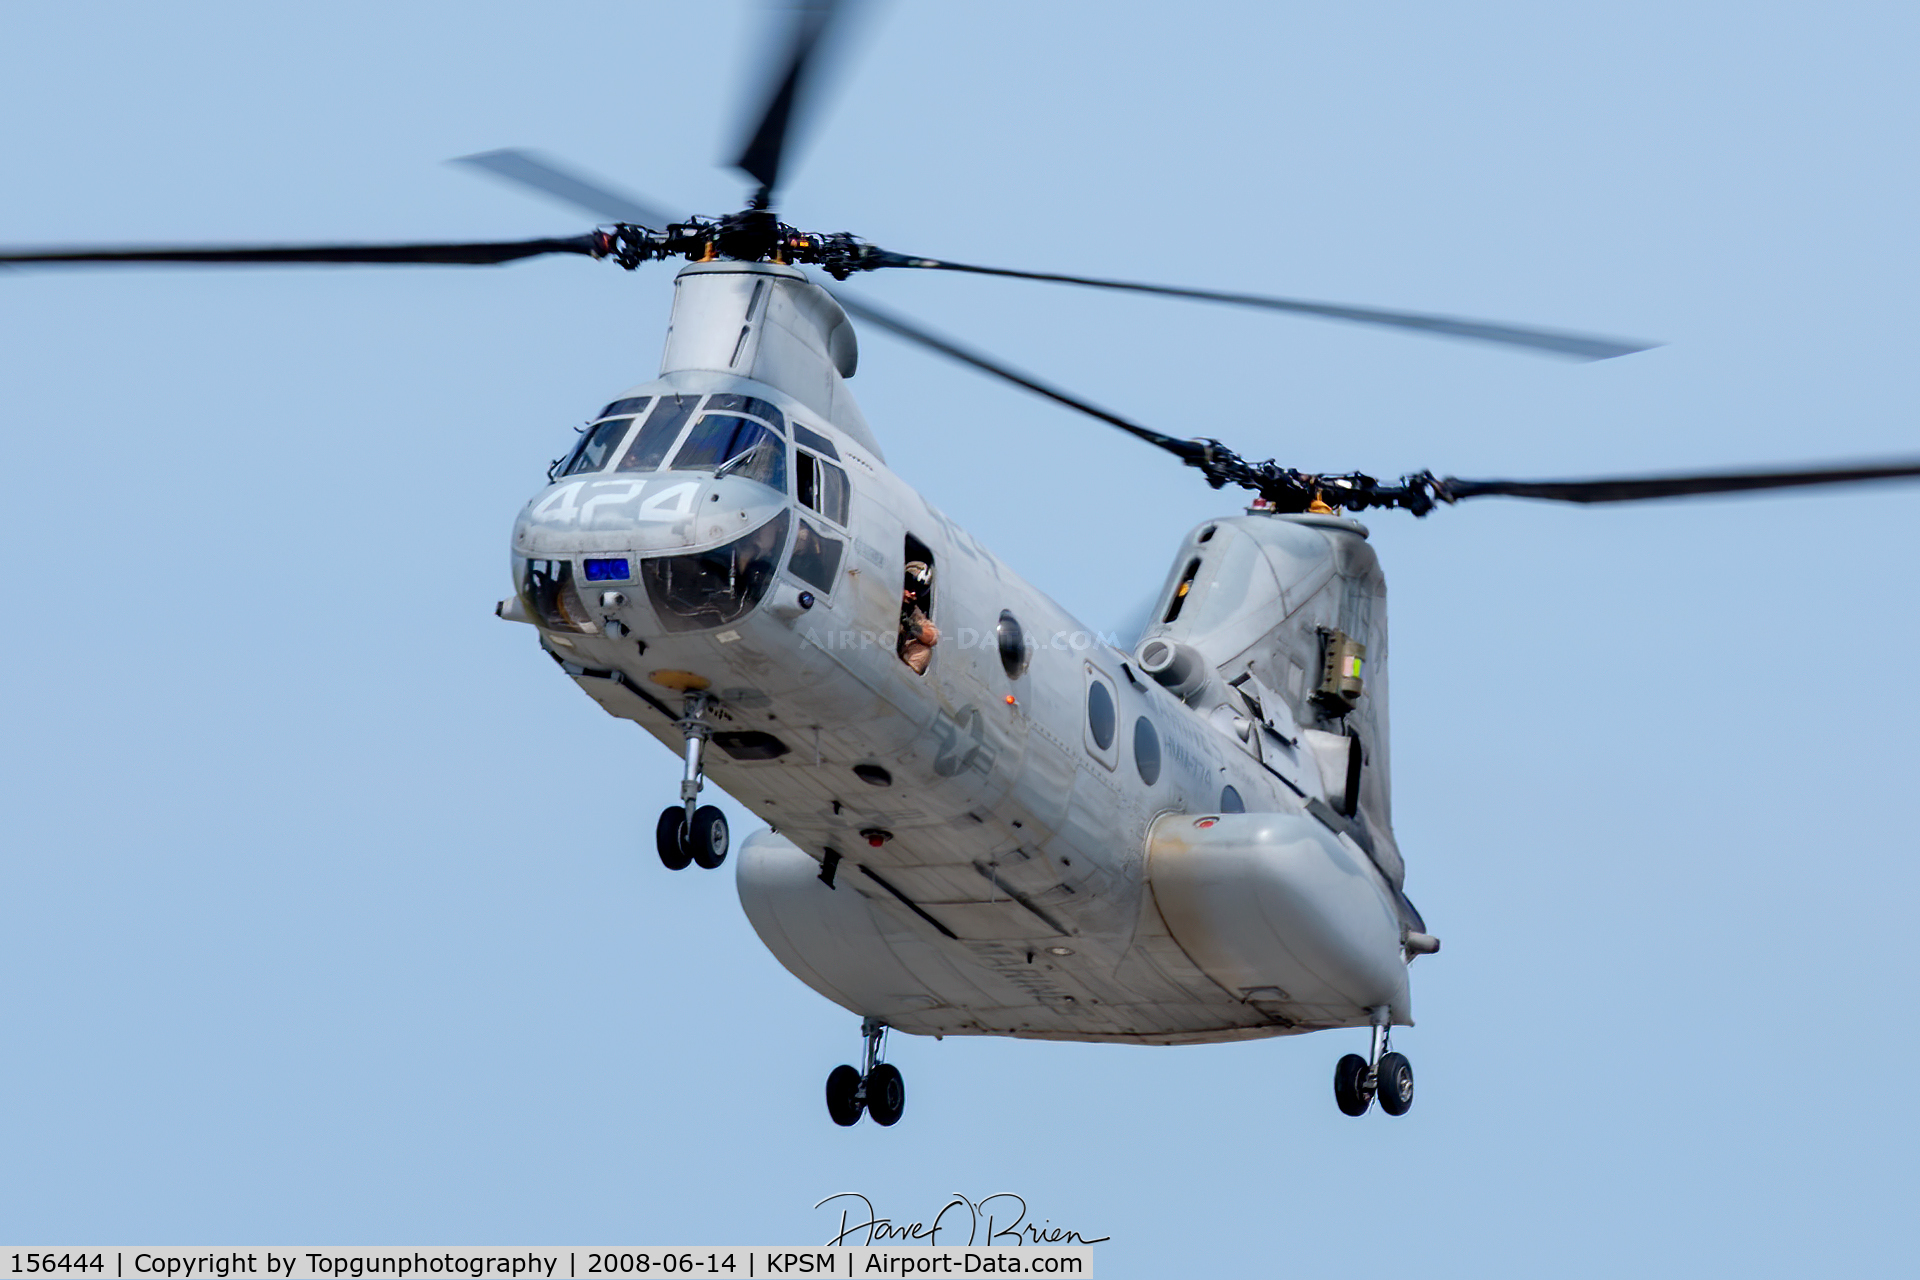 156444, Boeing Vertol CH-46E Sea Knight C/N 2514, Sea Knight dropping into PCA at Pease